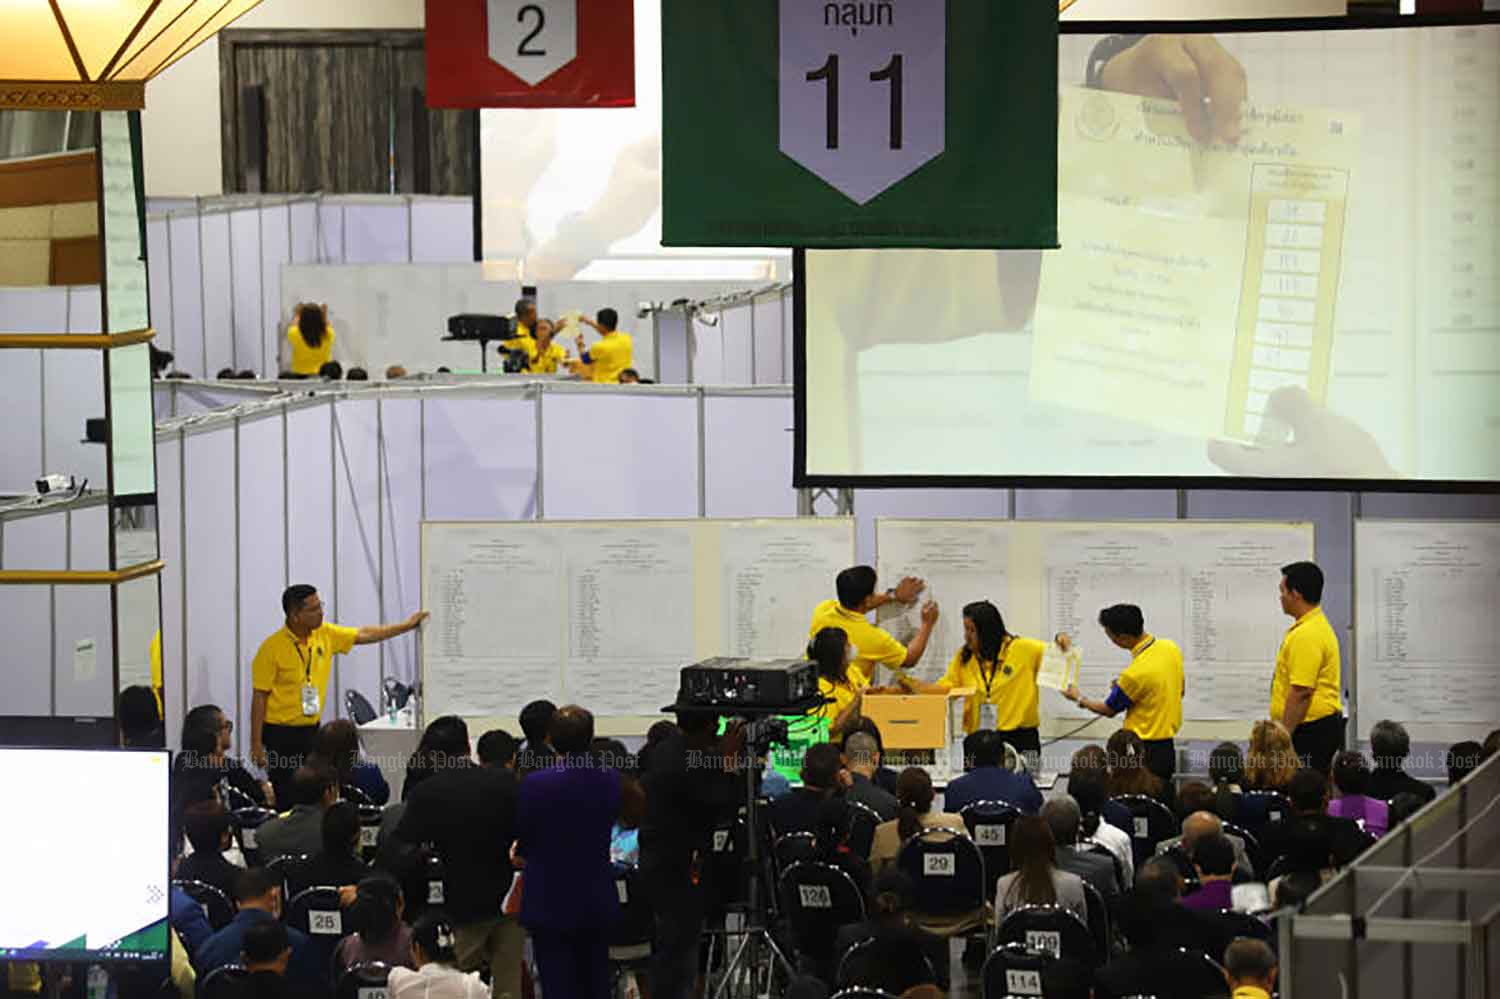 The final round of the senate election took place in Nonthaburi on Wednesday. (Photo: Nutthawat Wichieanbut)